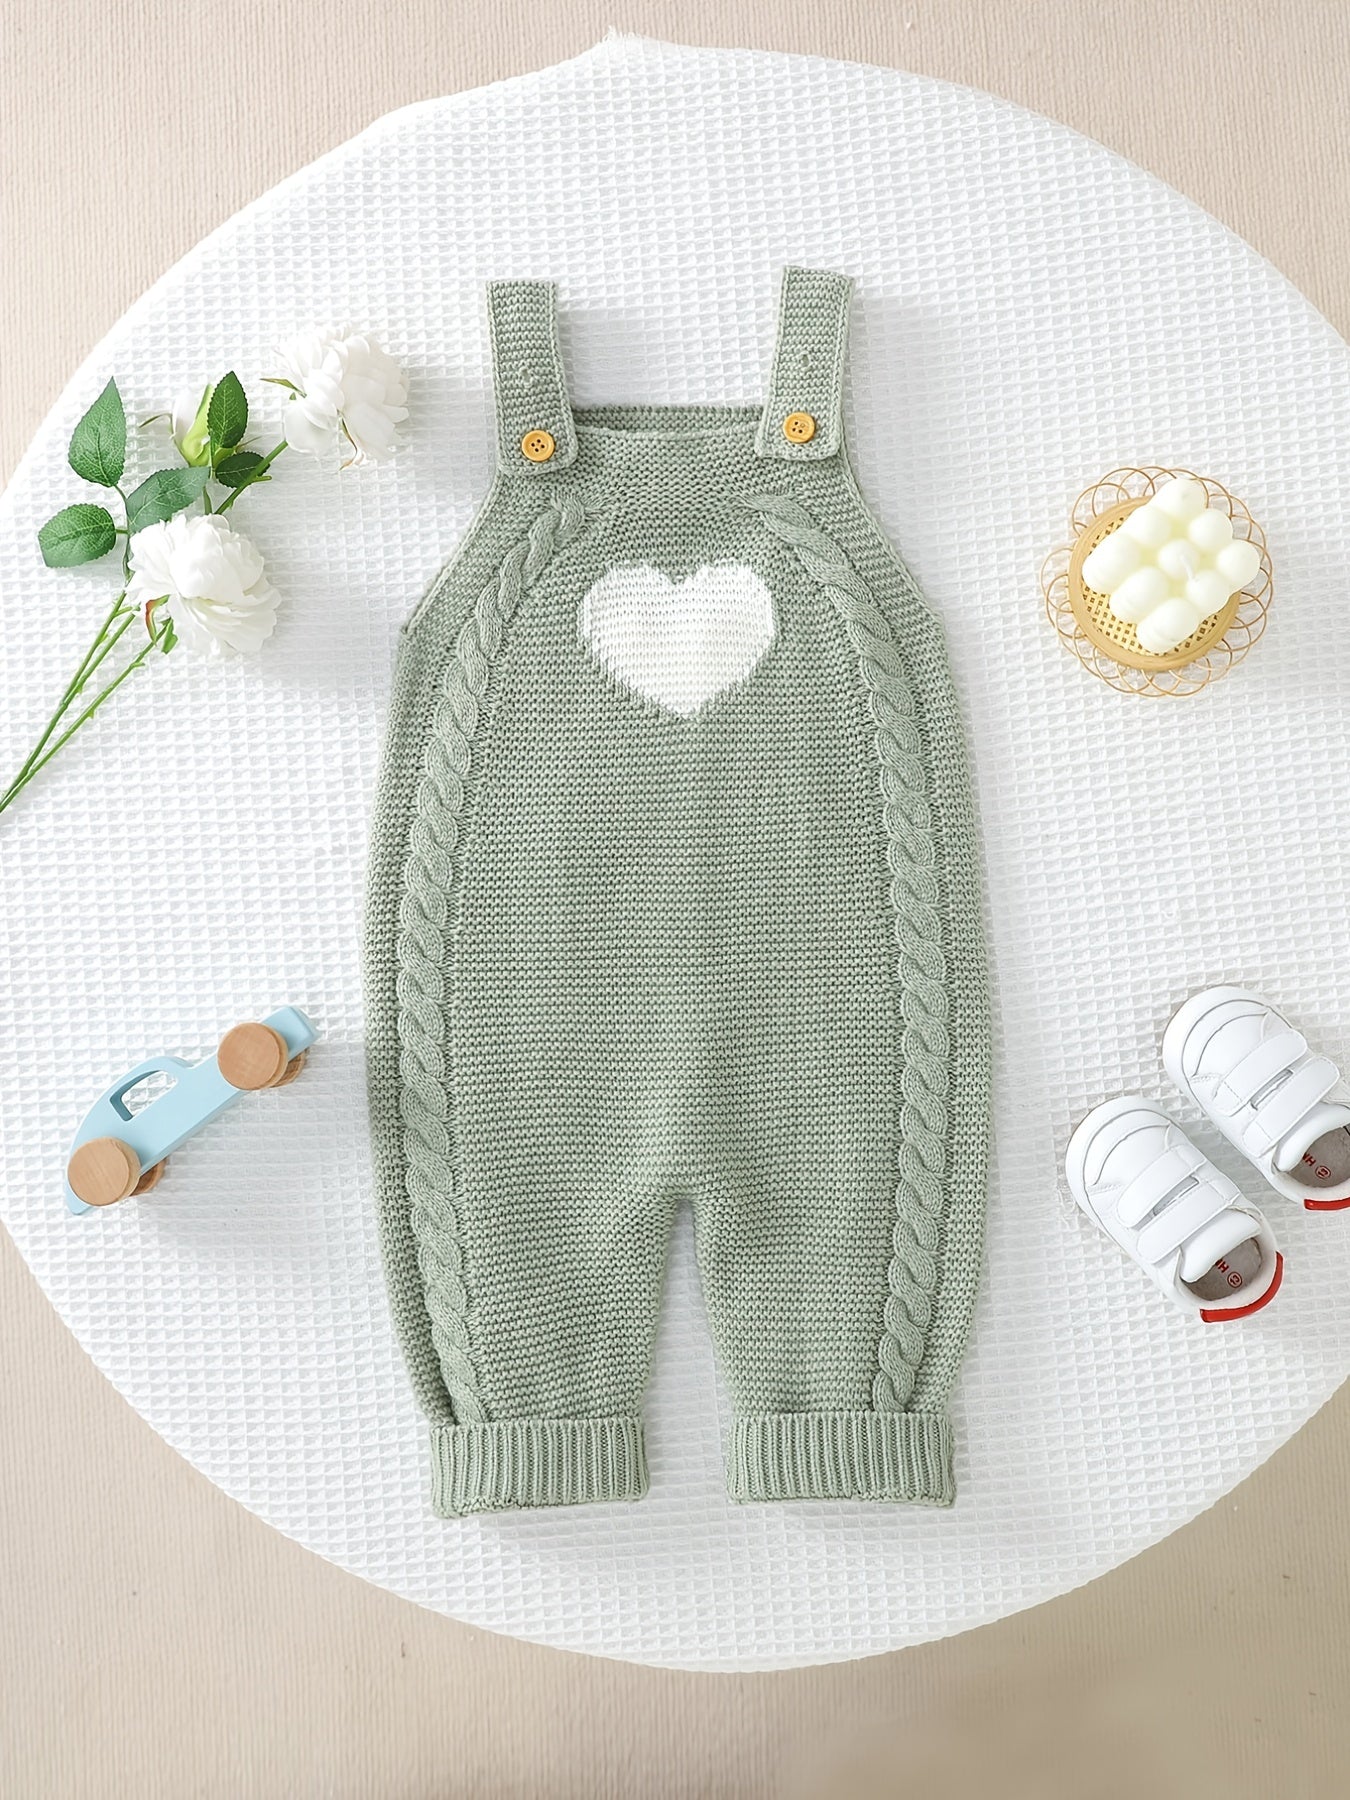 Unisex Baby Knit One Piece, Heart Pattern Overalls, Knit Bib Pants, Sleeveless Jumpsuit For Winter Baby Clothes